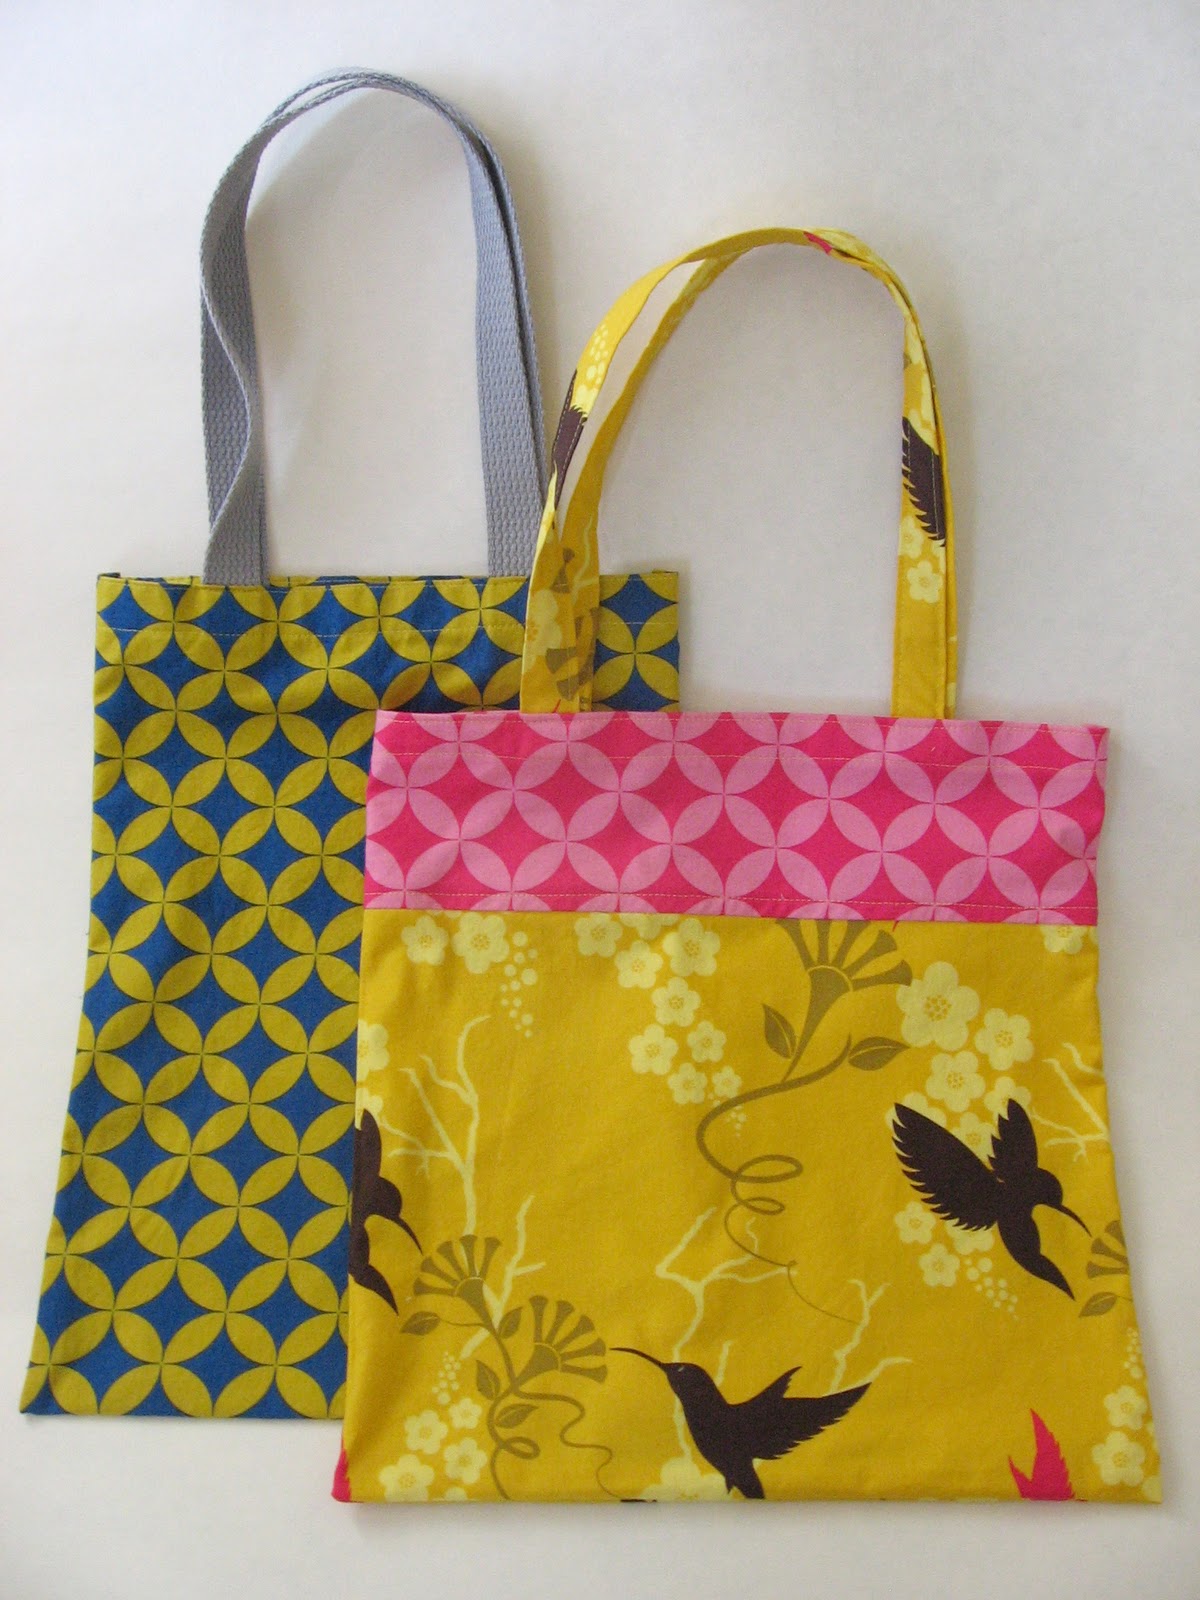 diy tote bag tutorial+easy to sew+sewing pattern free (sewing for  beginners) 